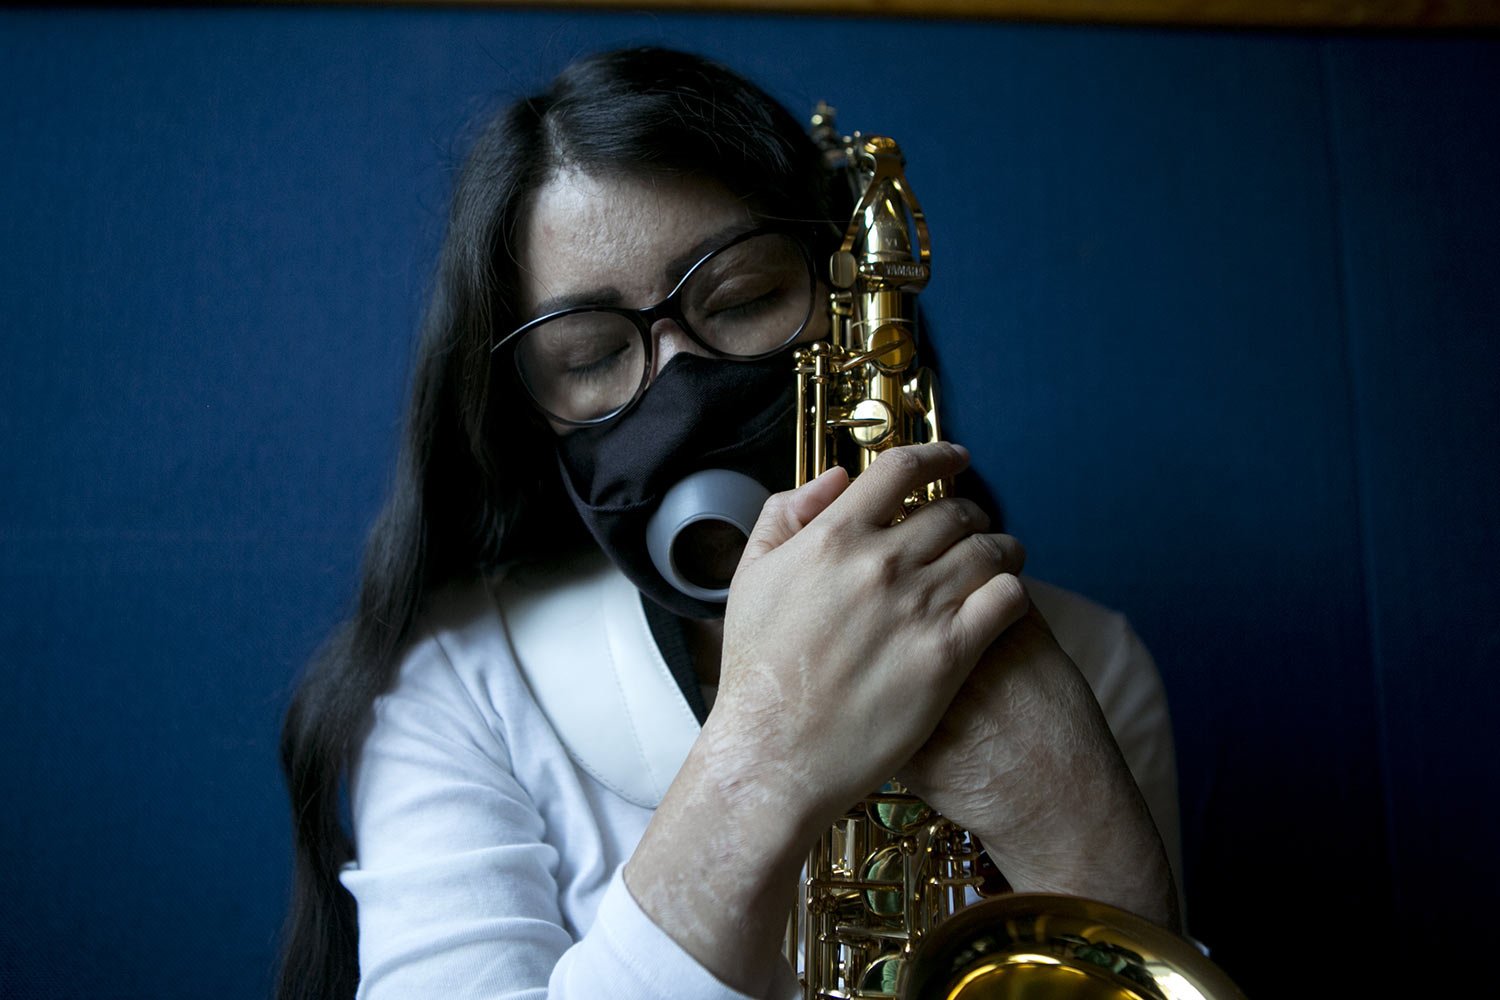  Maria Elena Ríos holds her saxophone at the end of a rehearsal at the National Autonomous University of Mexico music department, in Mexico City, Tuesday, Feb. 14, 2023. Ríos, 29, thought her career as a musician and her devotion to her sax was what 